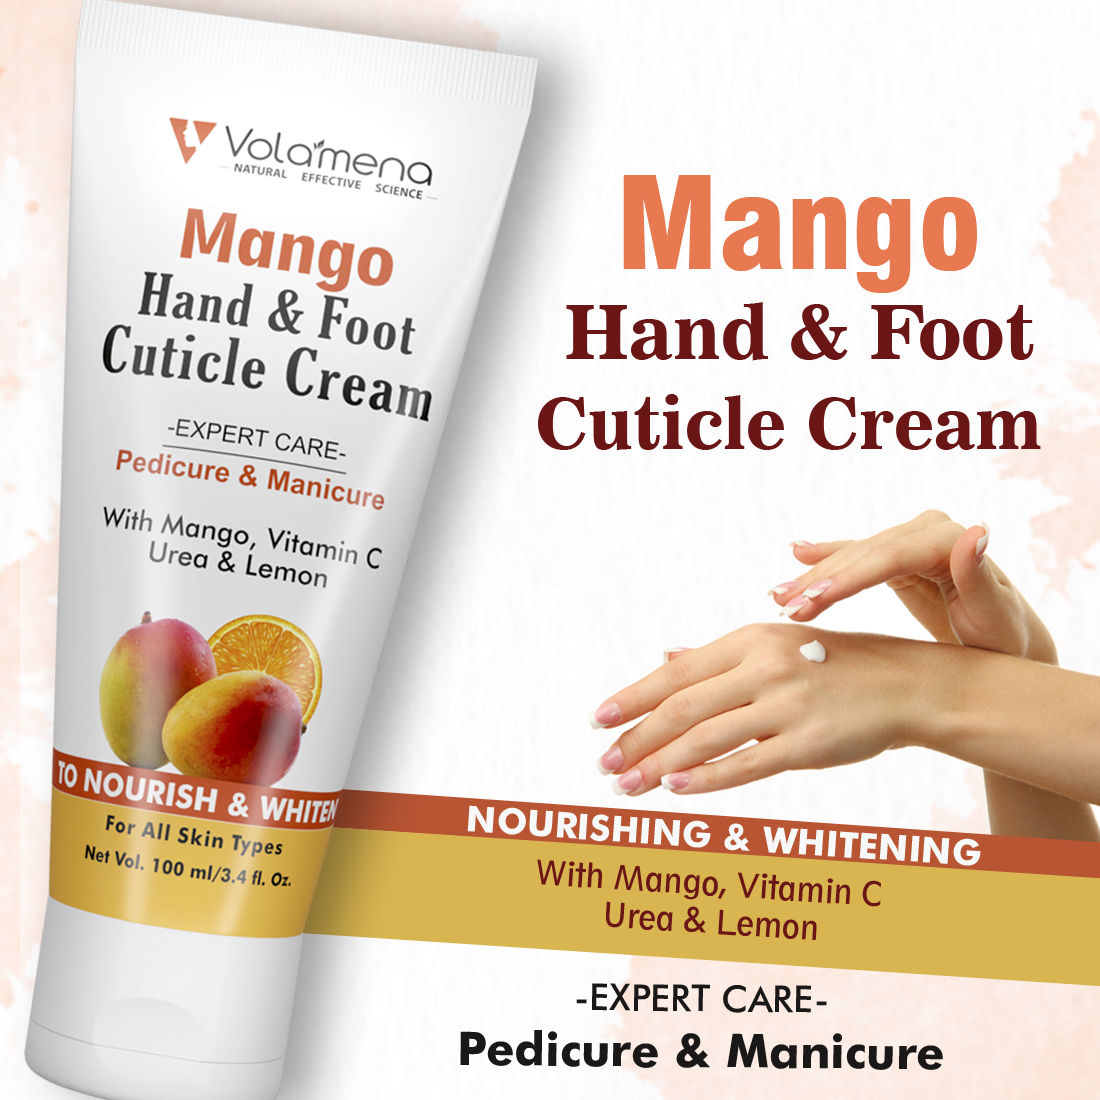 Cuticle Cream Vs. Hand Lotion: Why You Need Both